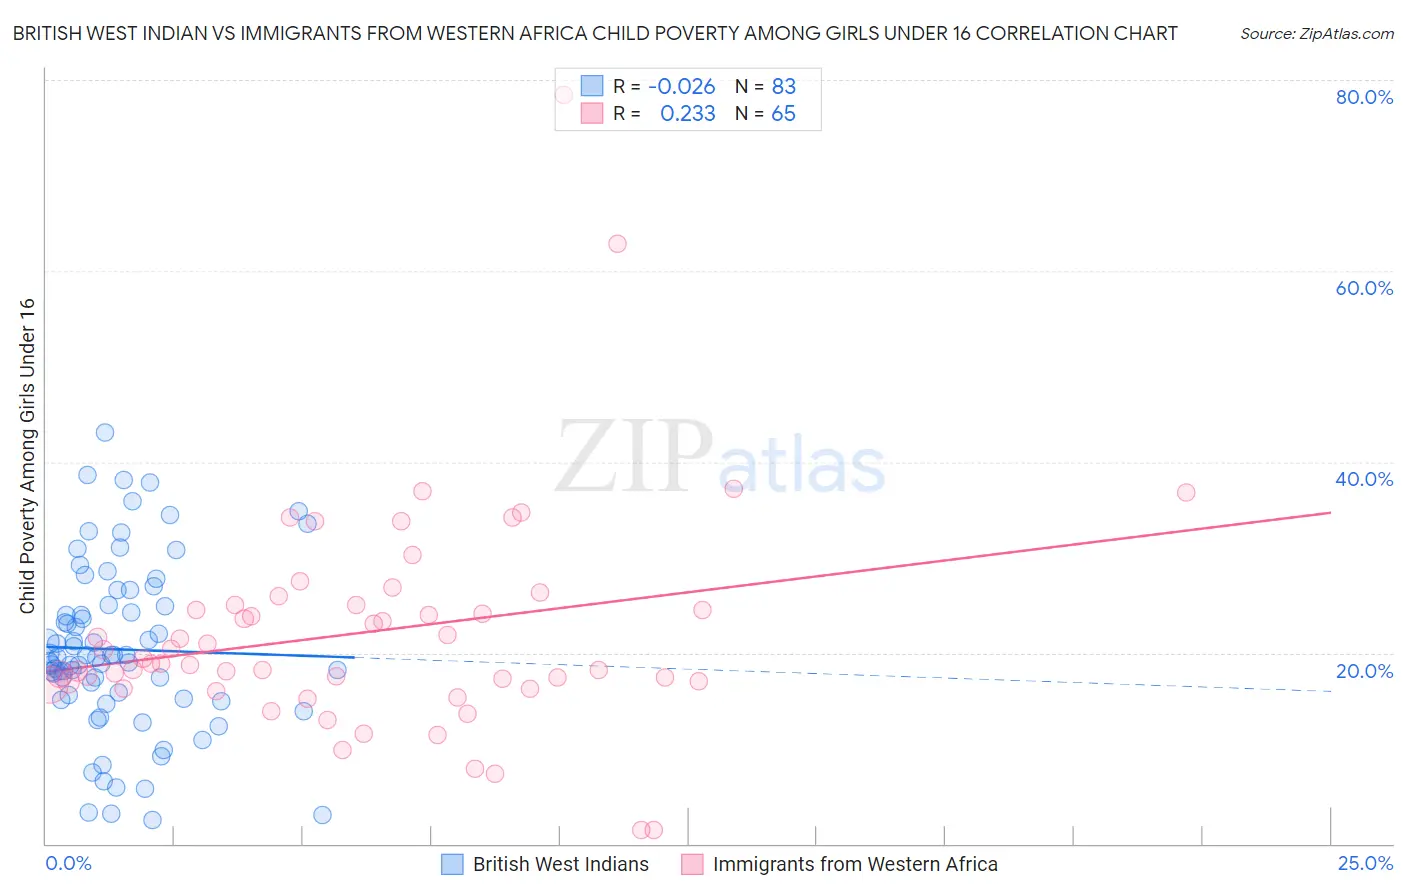 British West Indian vs Immigrants from Western Africa Child Poverty Among Girls Under 16